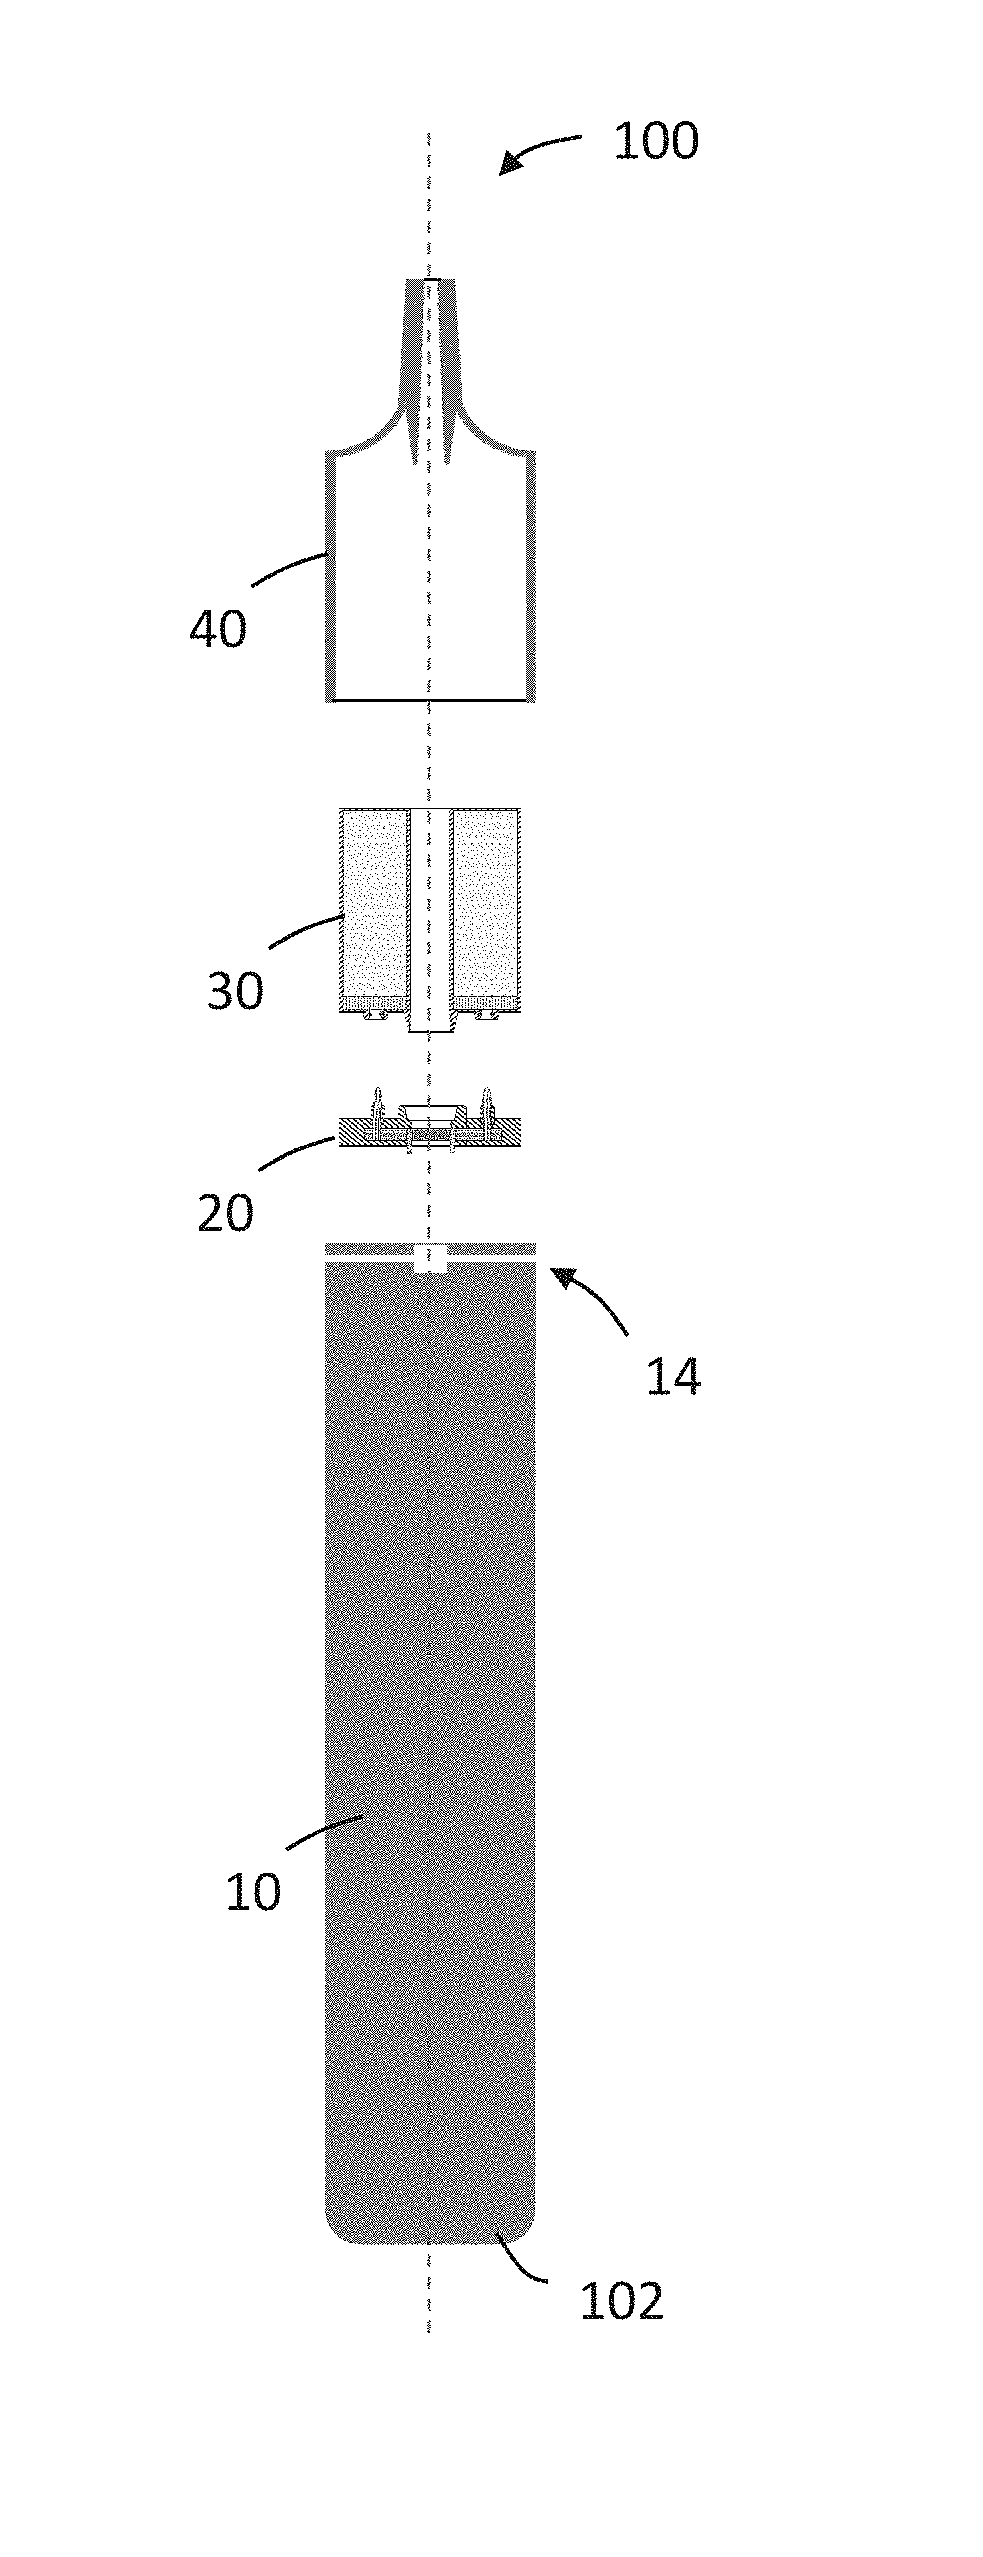 Aerosol-generating system with separate capsule and vaporizer